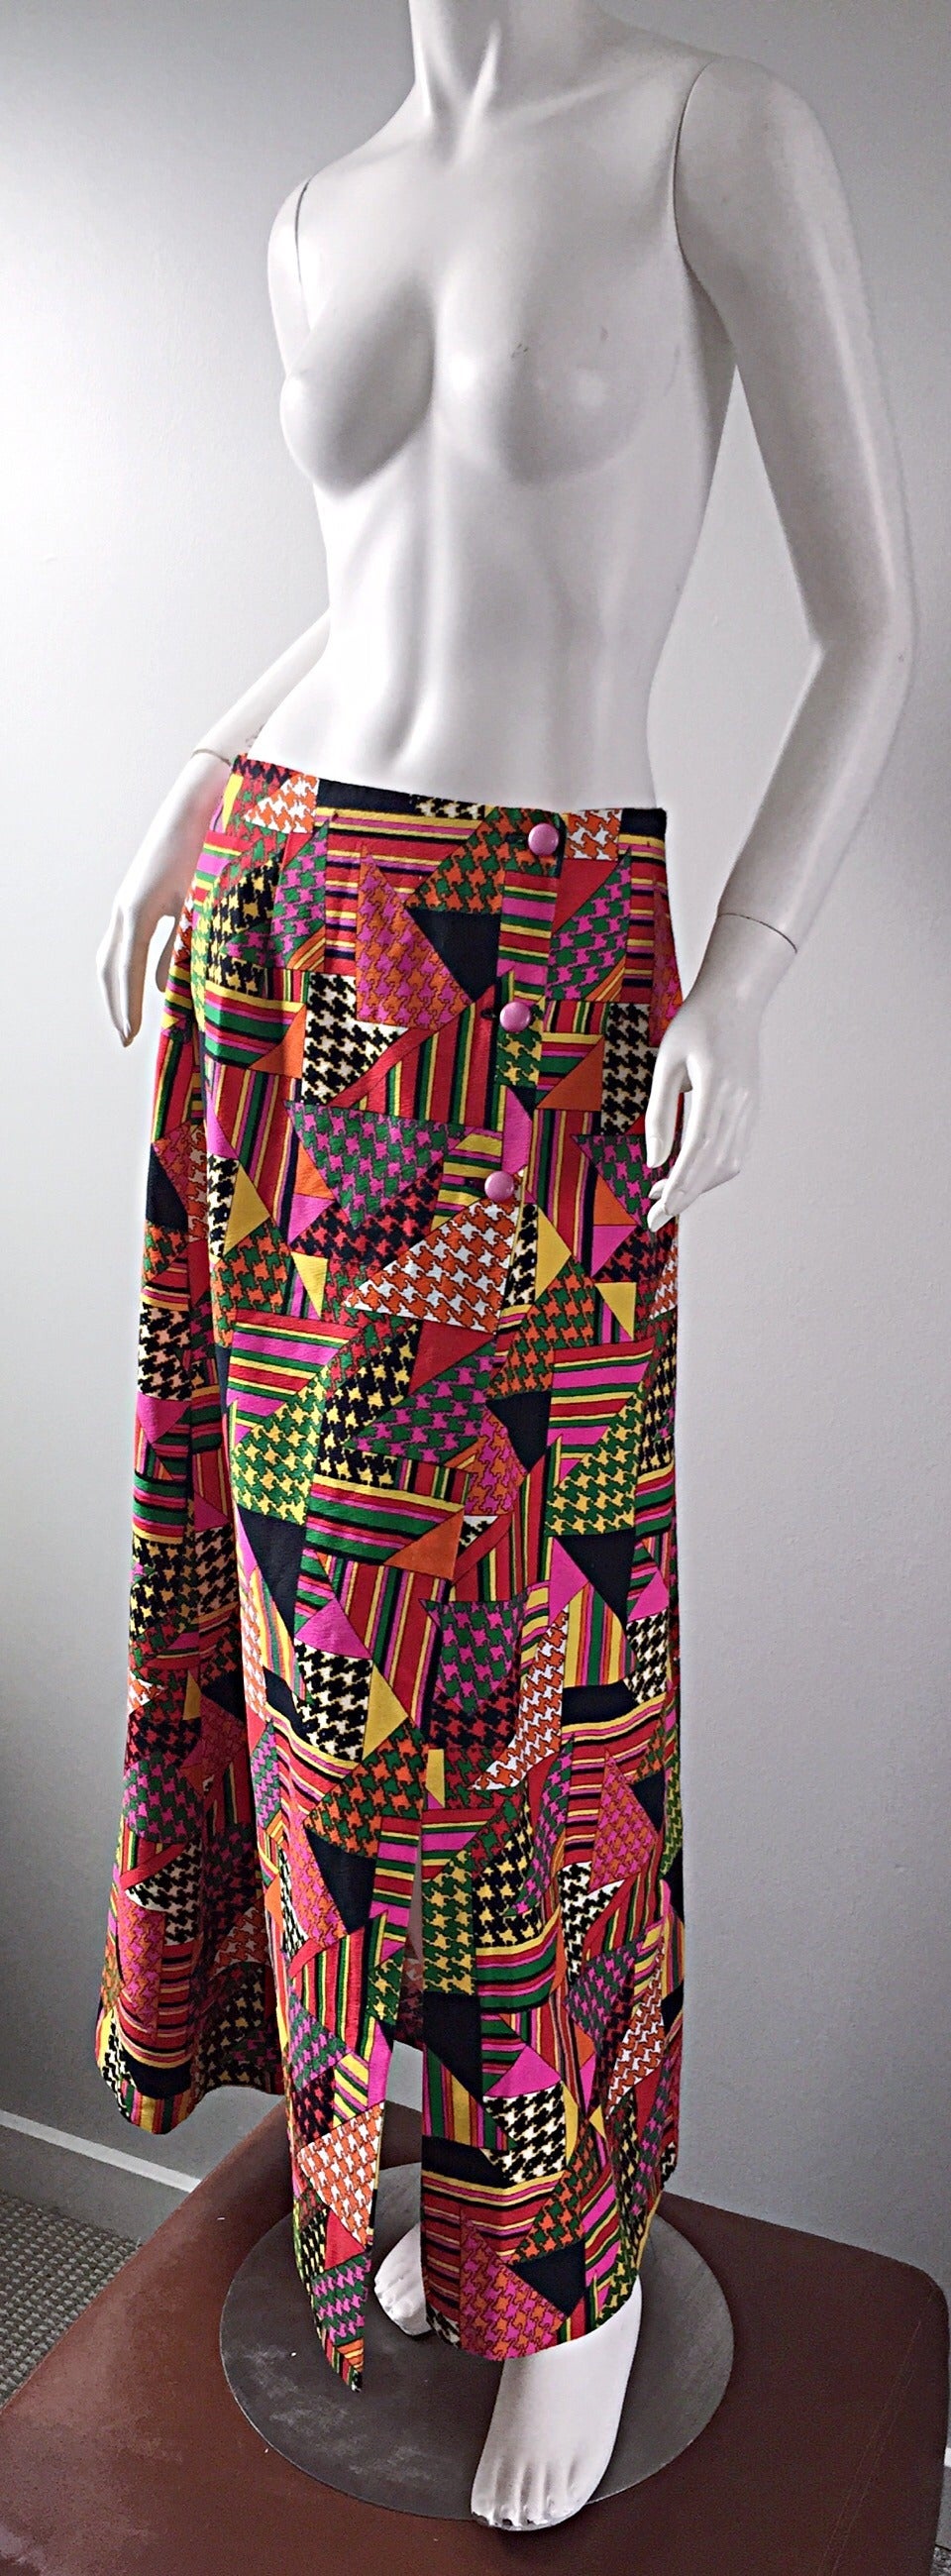 Amazing late 1960s / early 1970s cotton Maxi skirt! Features multi color geometric shapes throughout, with houndstooth accents. Pink buttons up the side. 100% Cotton. In great condition. Approximately Size Medium

Measurements:
30 inch waist
46